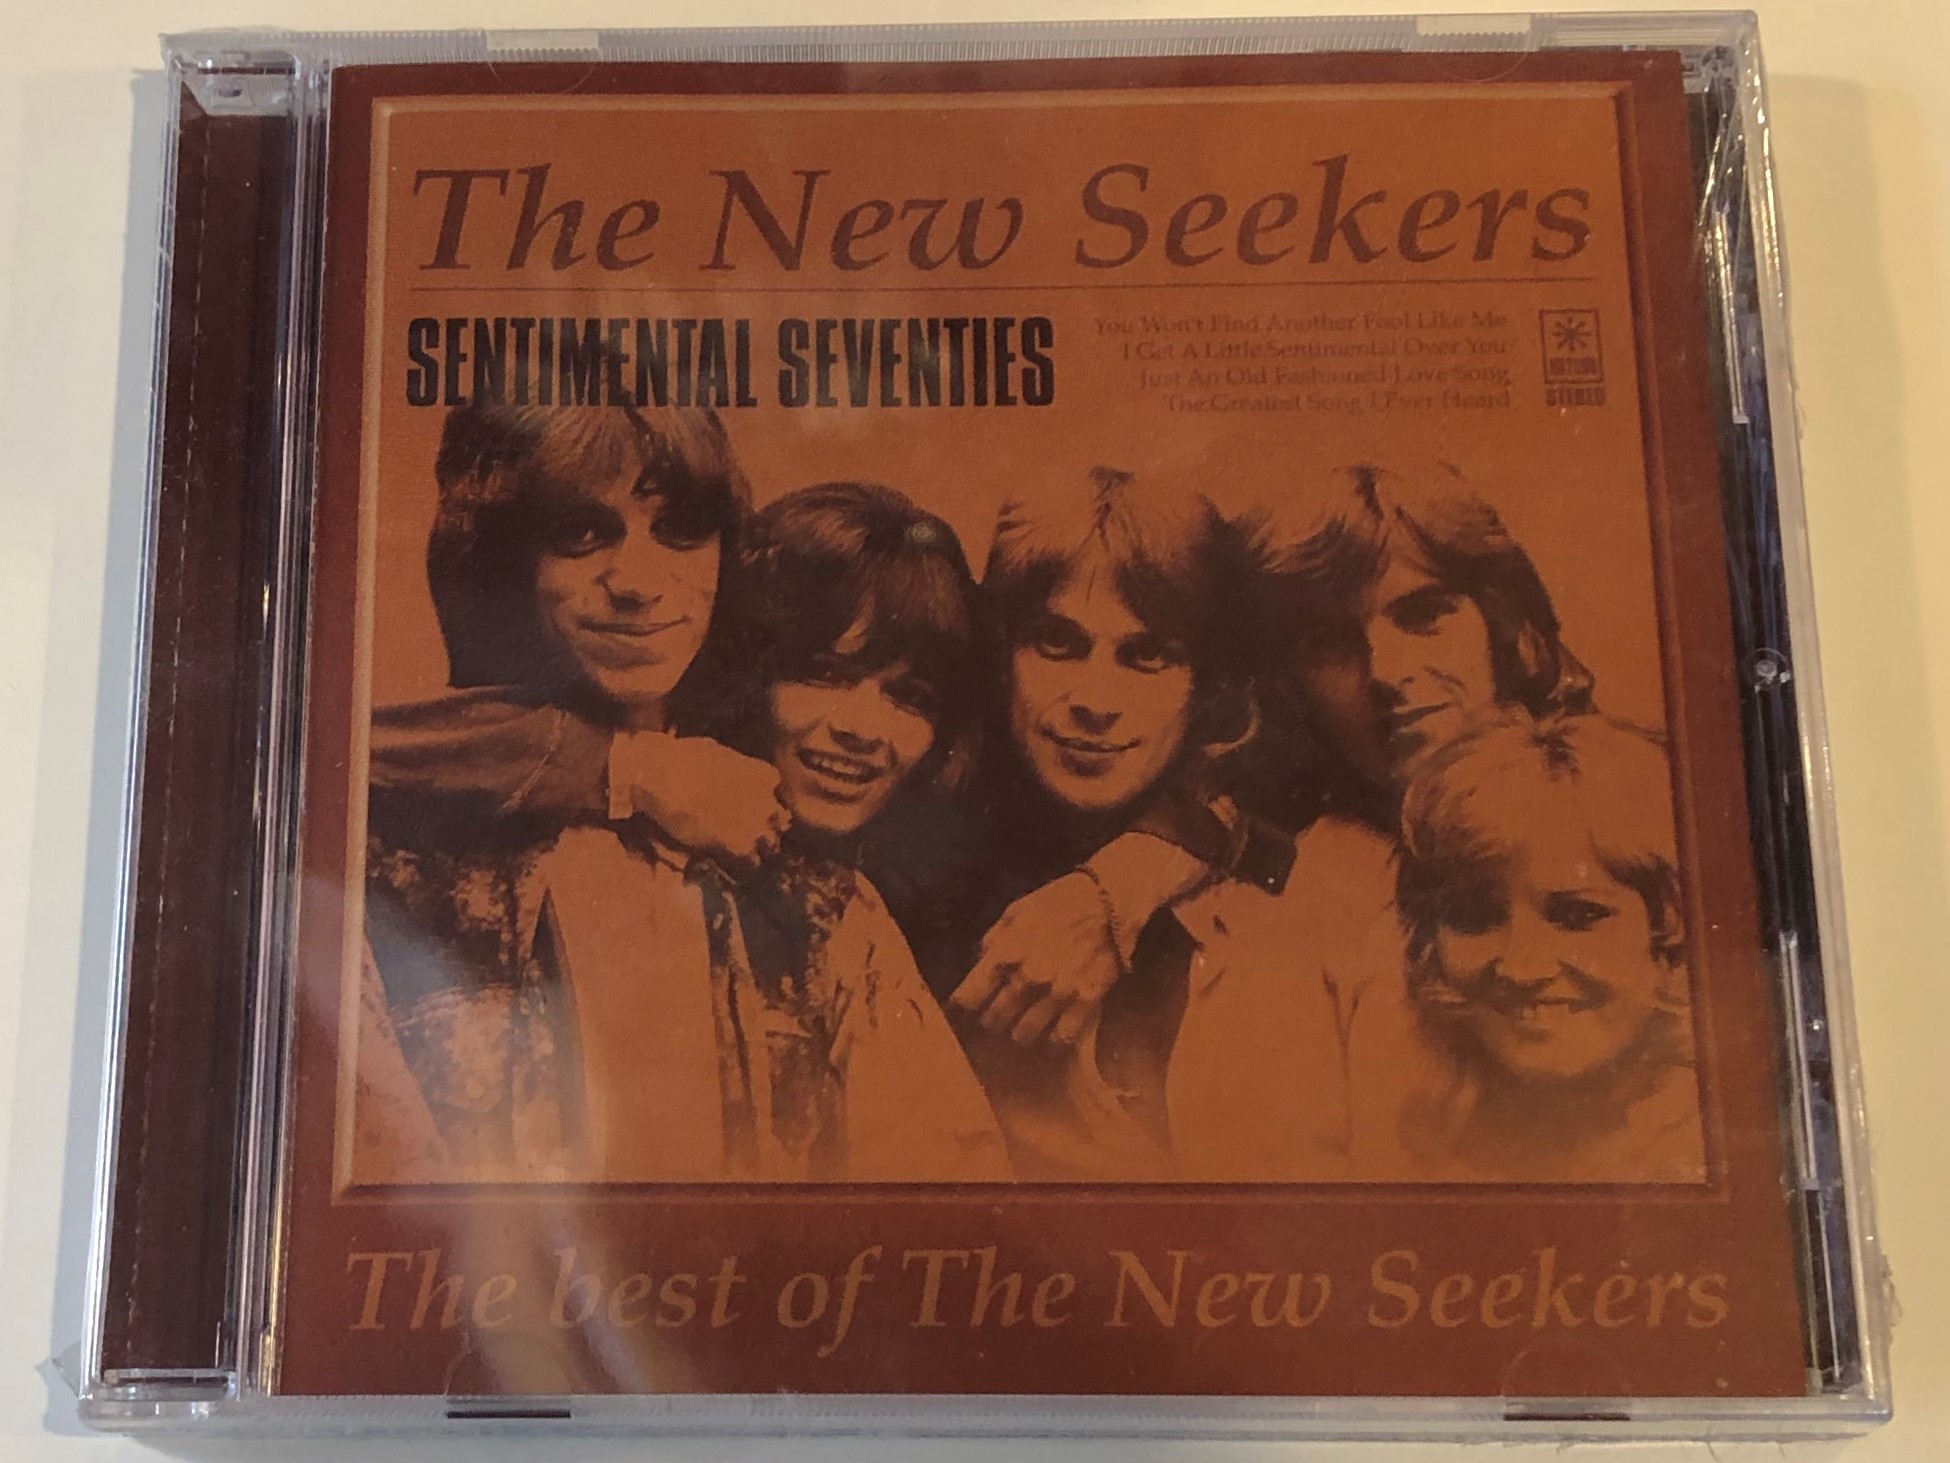 the-new-seekers-sentimental-seventies-the-best-of-the-new-seekers-new-sound-2000-ltd.-audio-cd-2004-nst039-1-.jpg